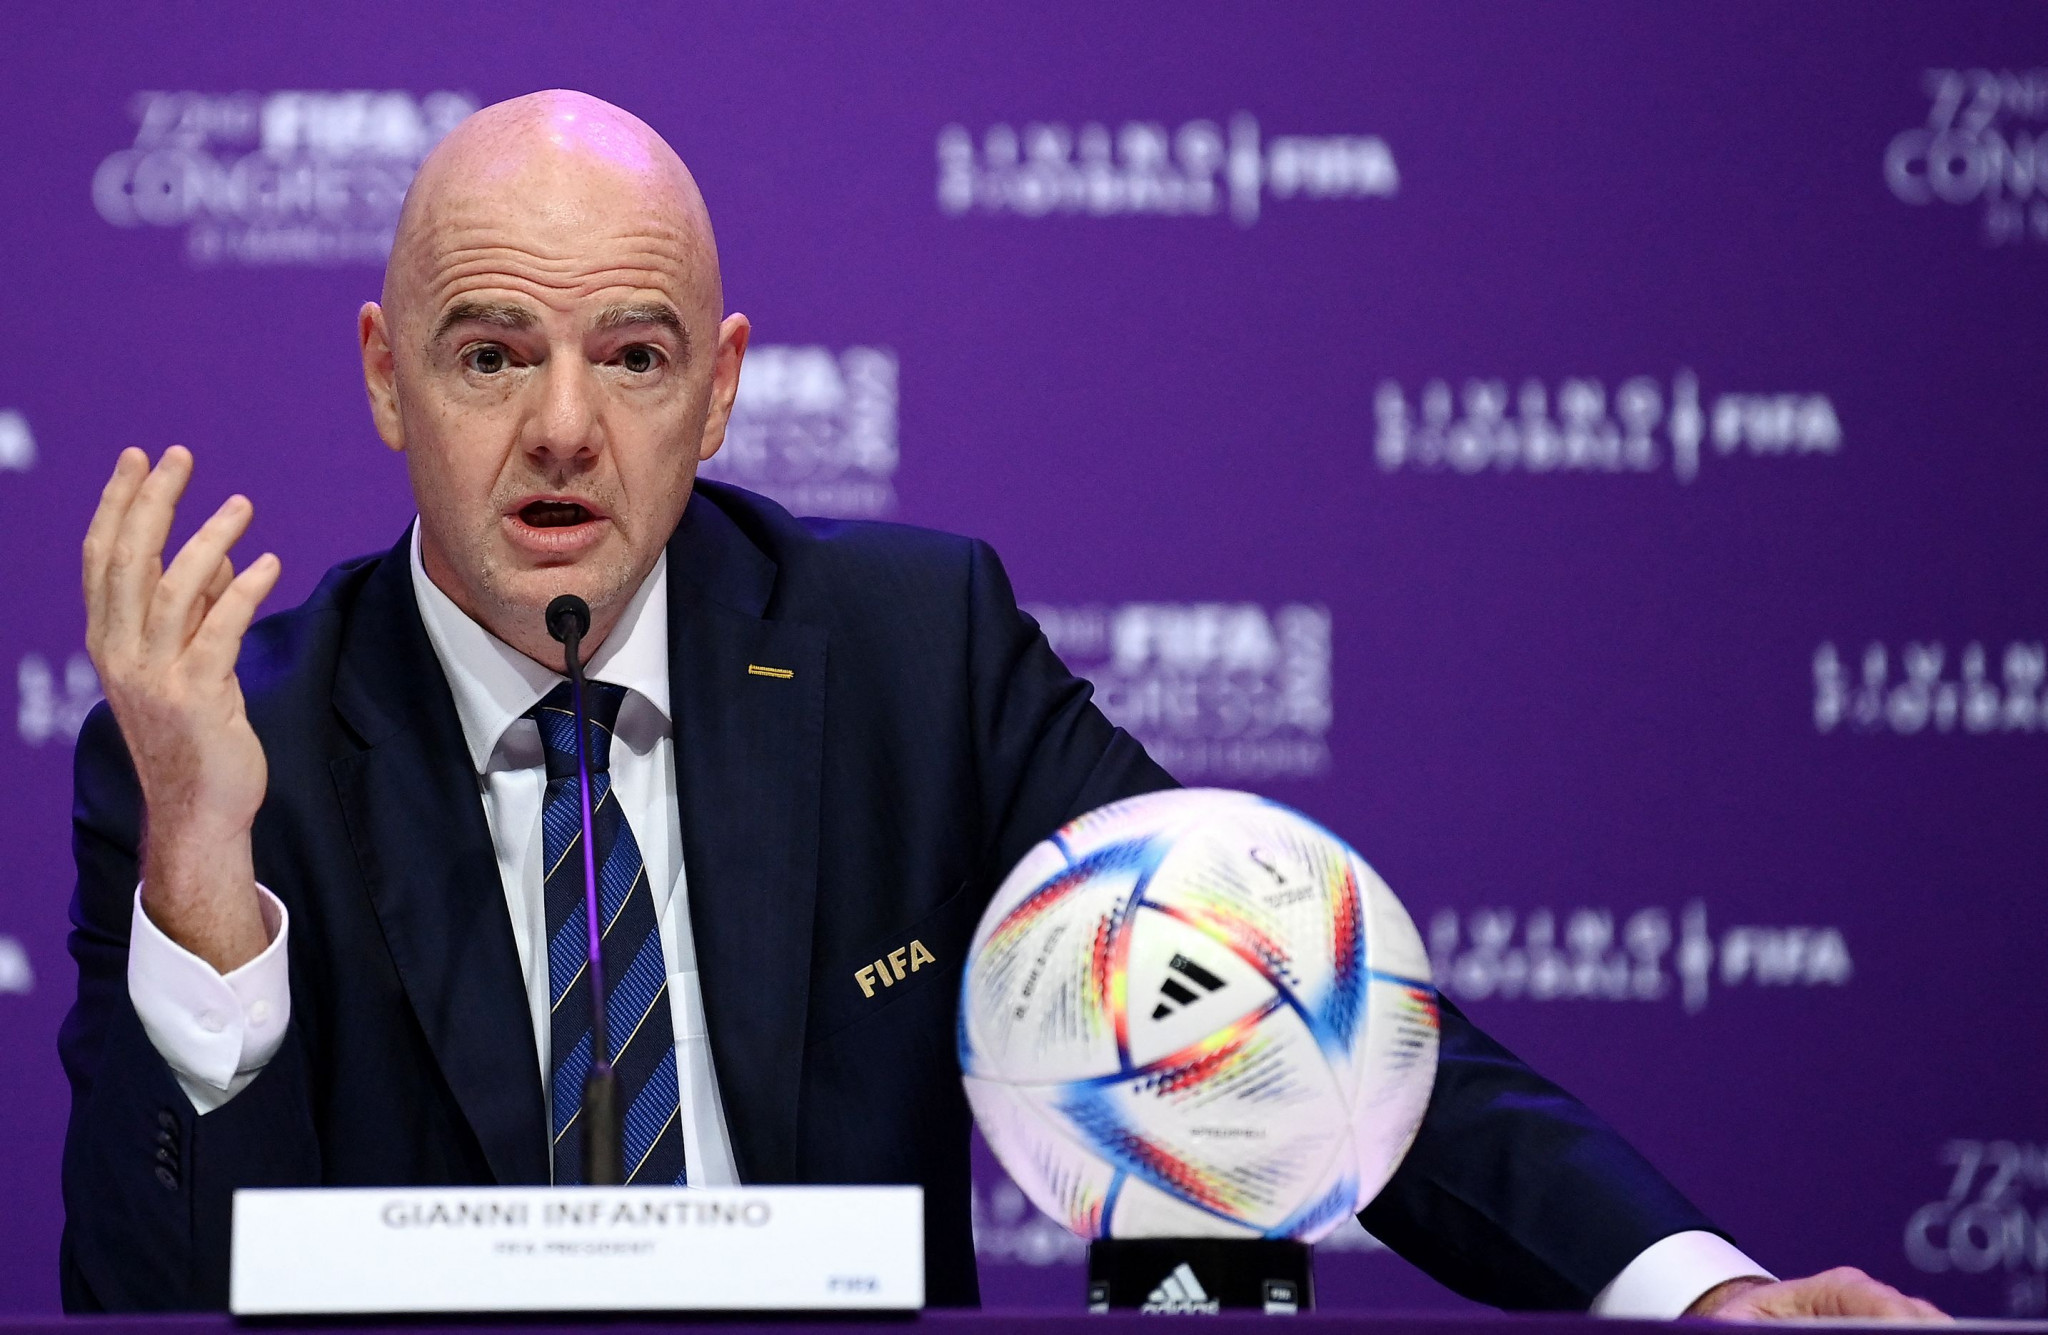 Panagiotis Baltakos also met FIFA President Gianni Infantino in Paris in July shortly after winning the EPO Presidential election ©Getty Images